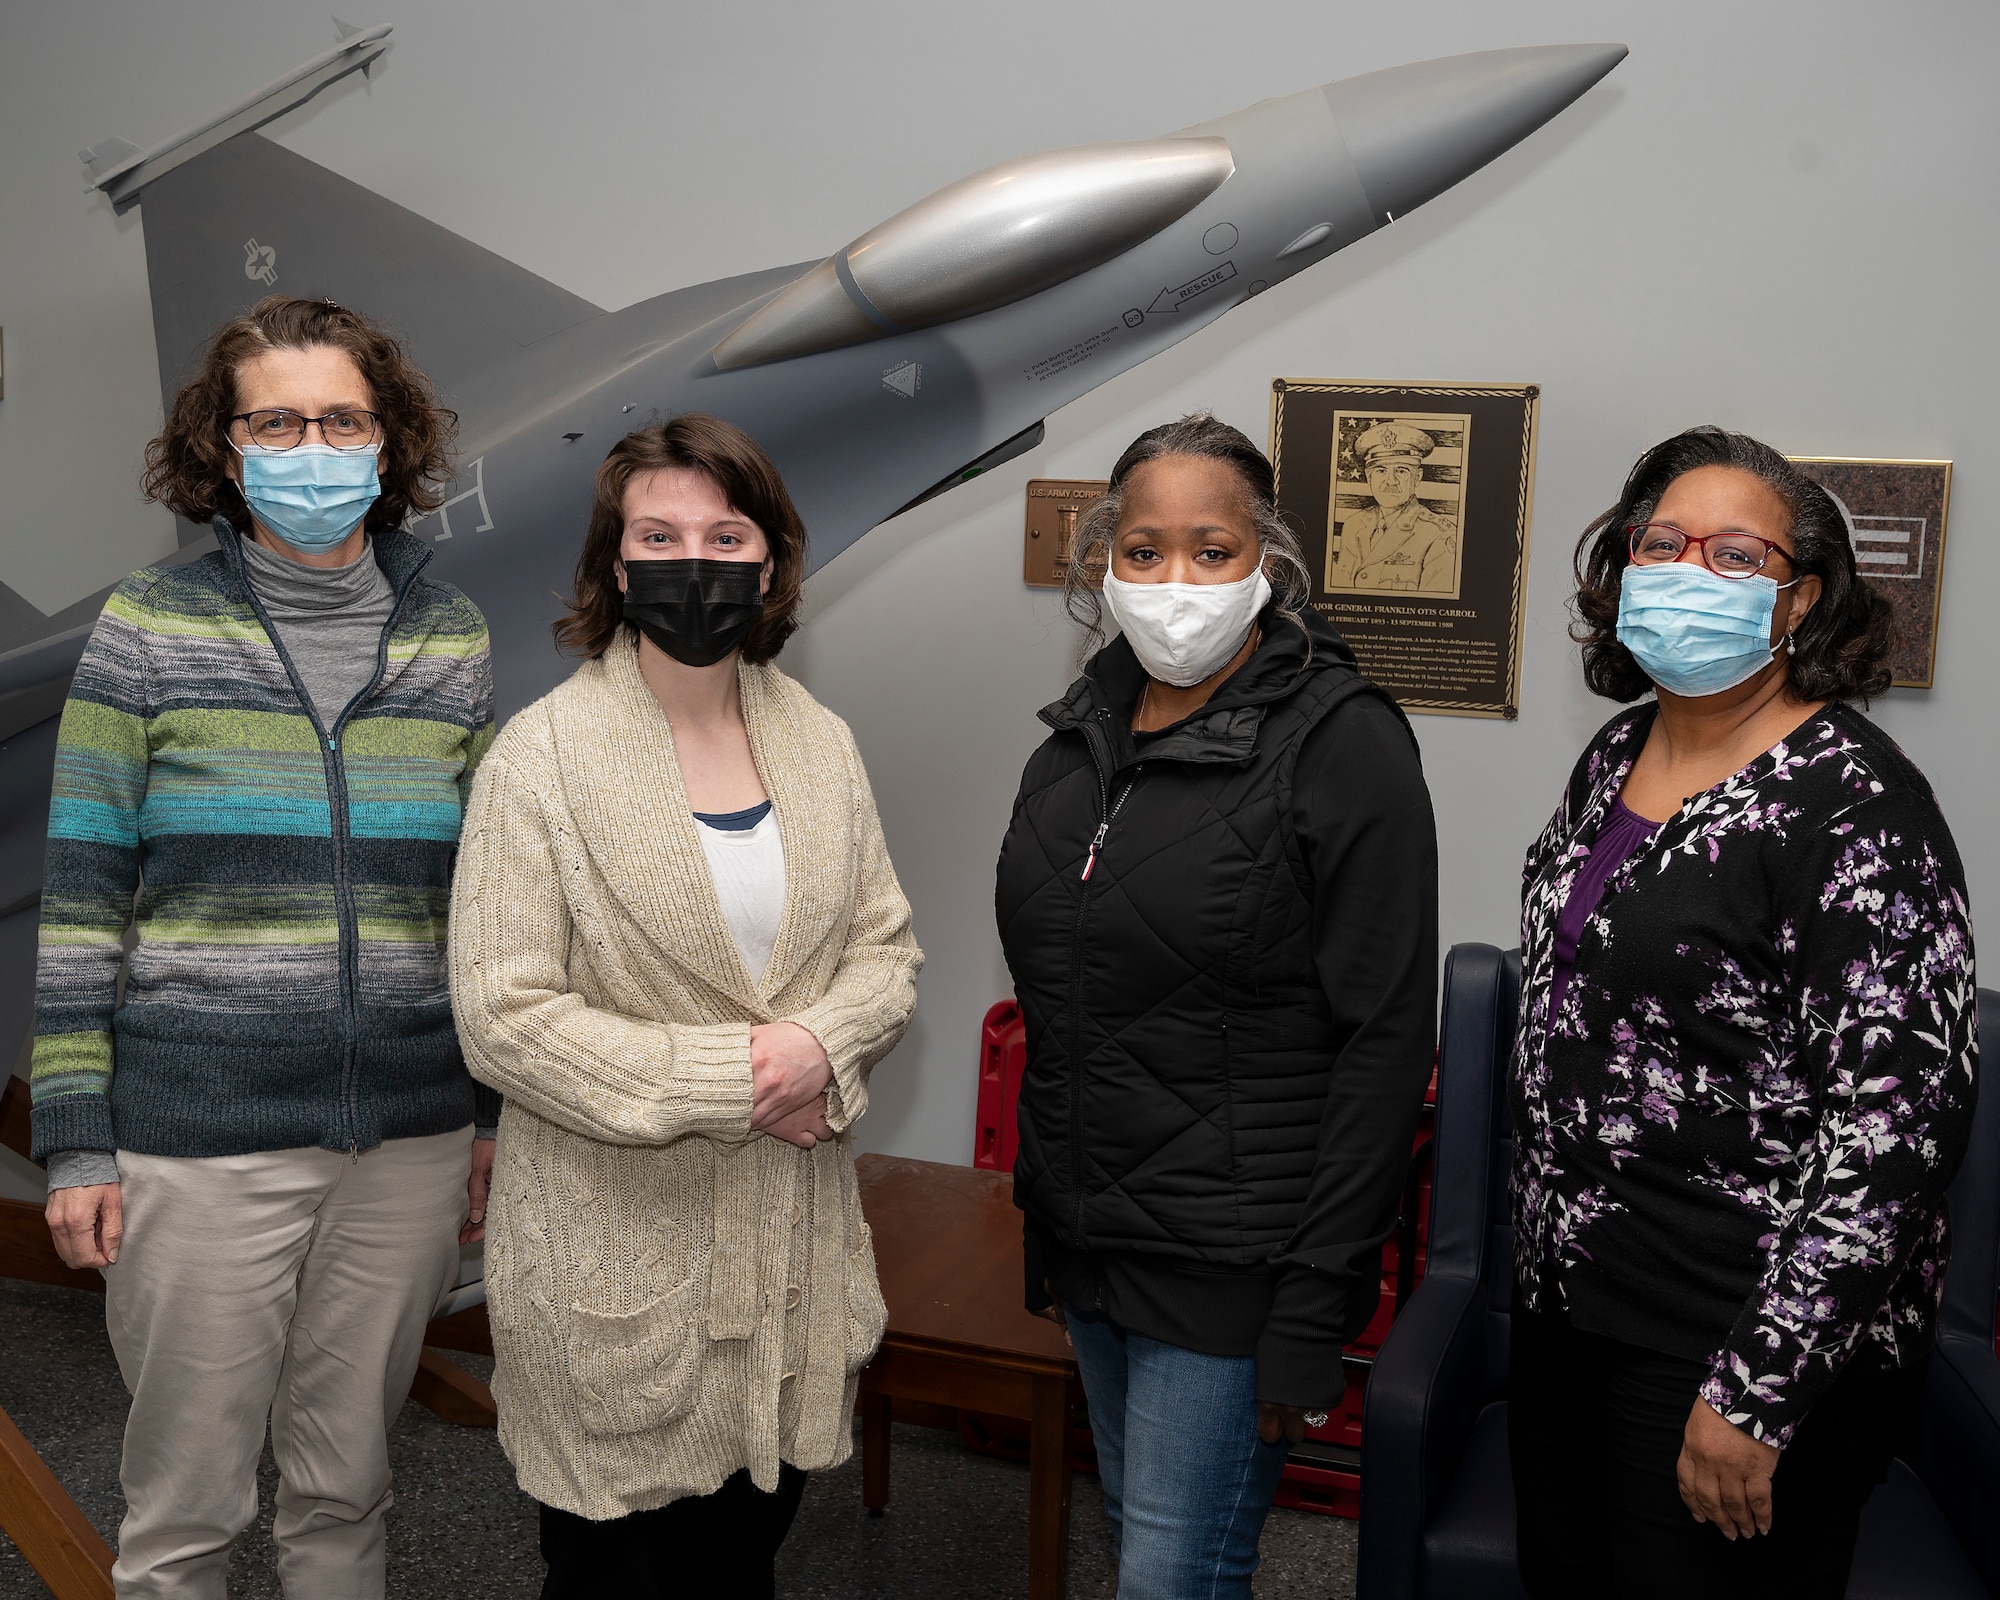 (Left to right) Rosmarie Edwards, Shea Sampson, Sandy Fields and Michelle Pickel. (U.S. Air Force photo by R.J. Oriez)